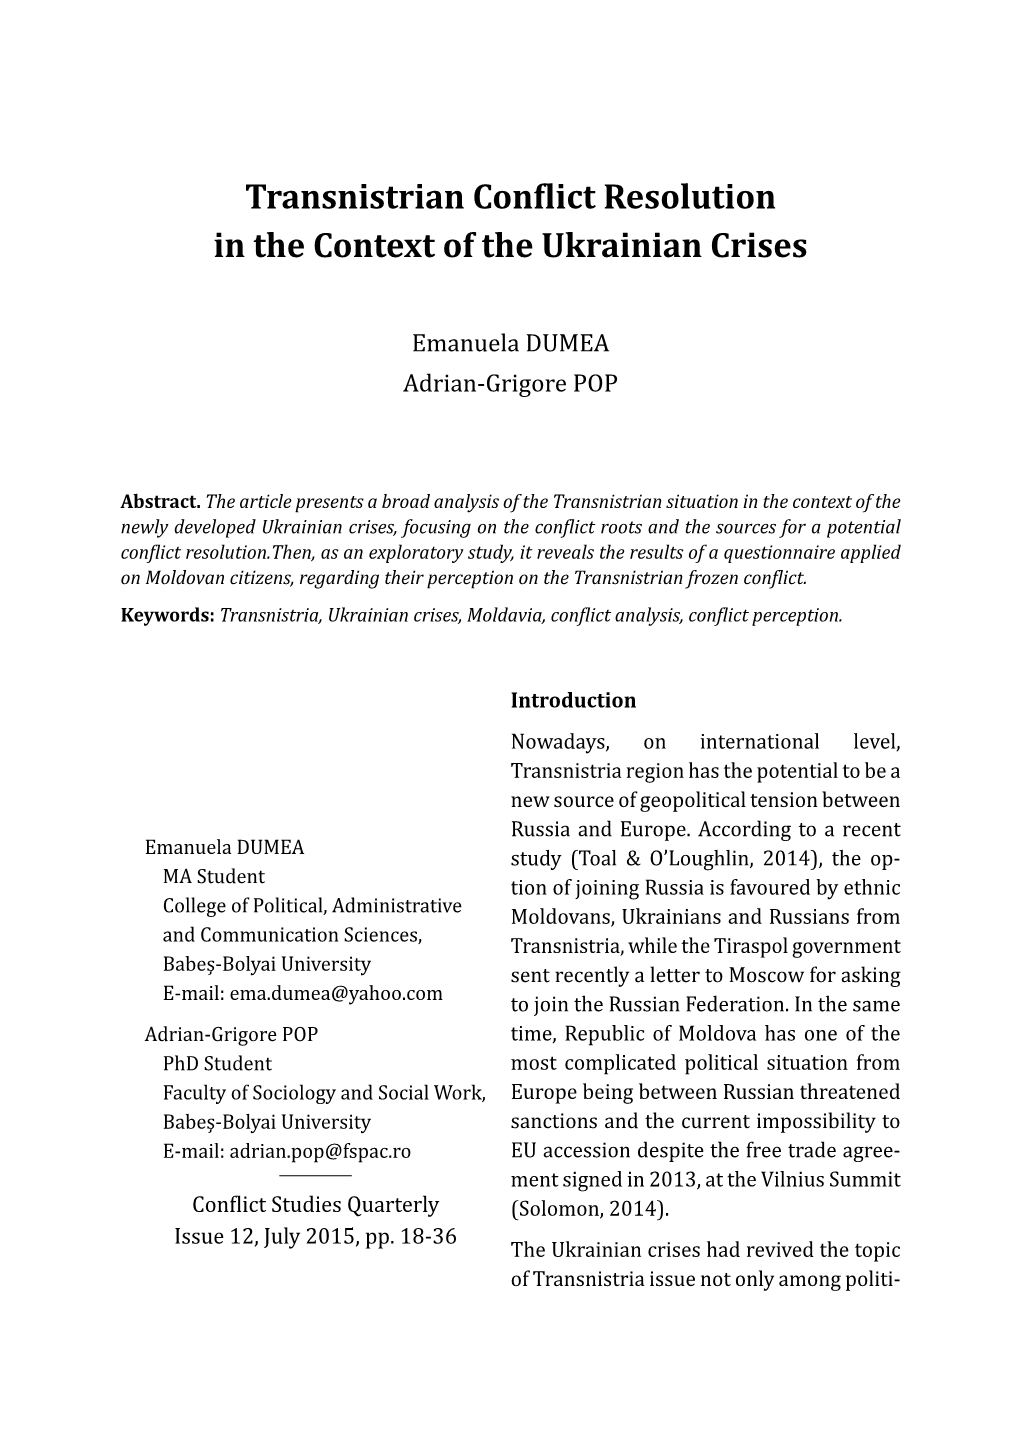 Transnistrian Conϐlict Resolution in the Context of the Ukrainian Crises